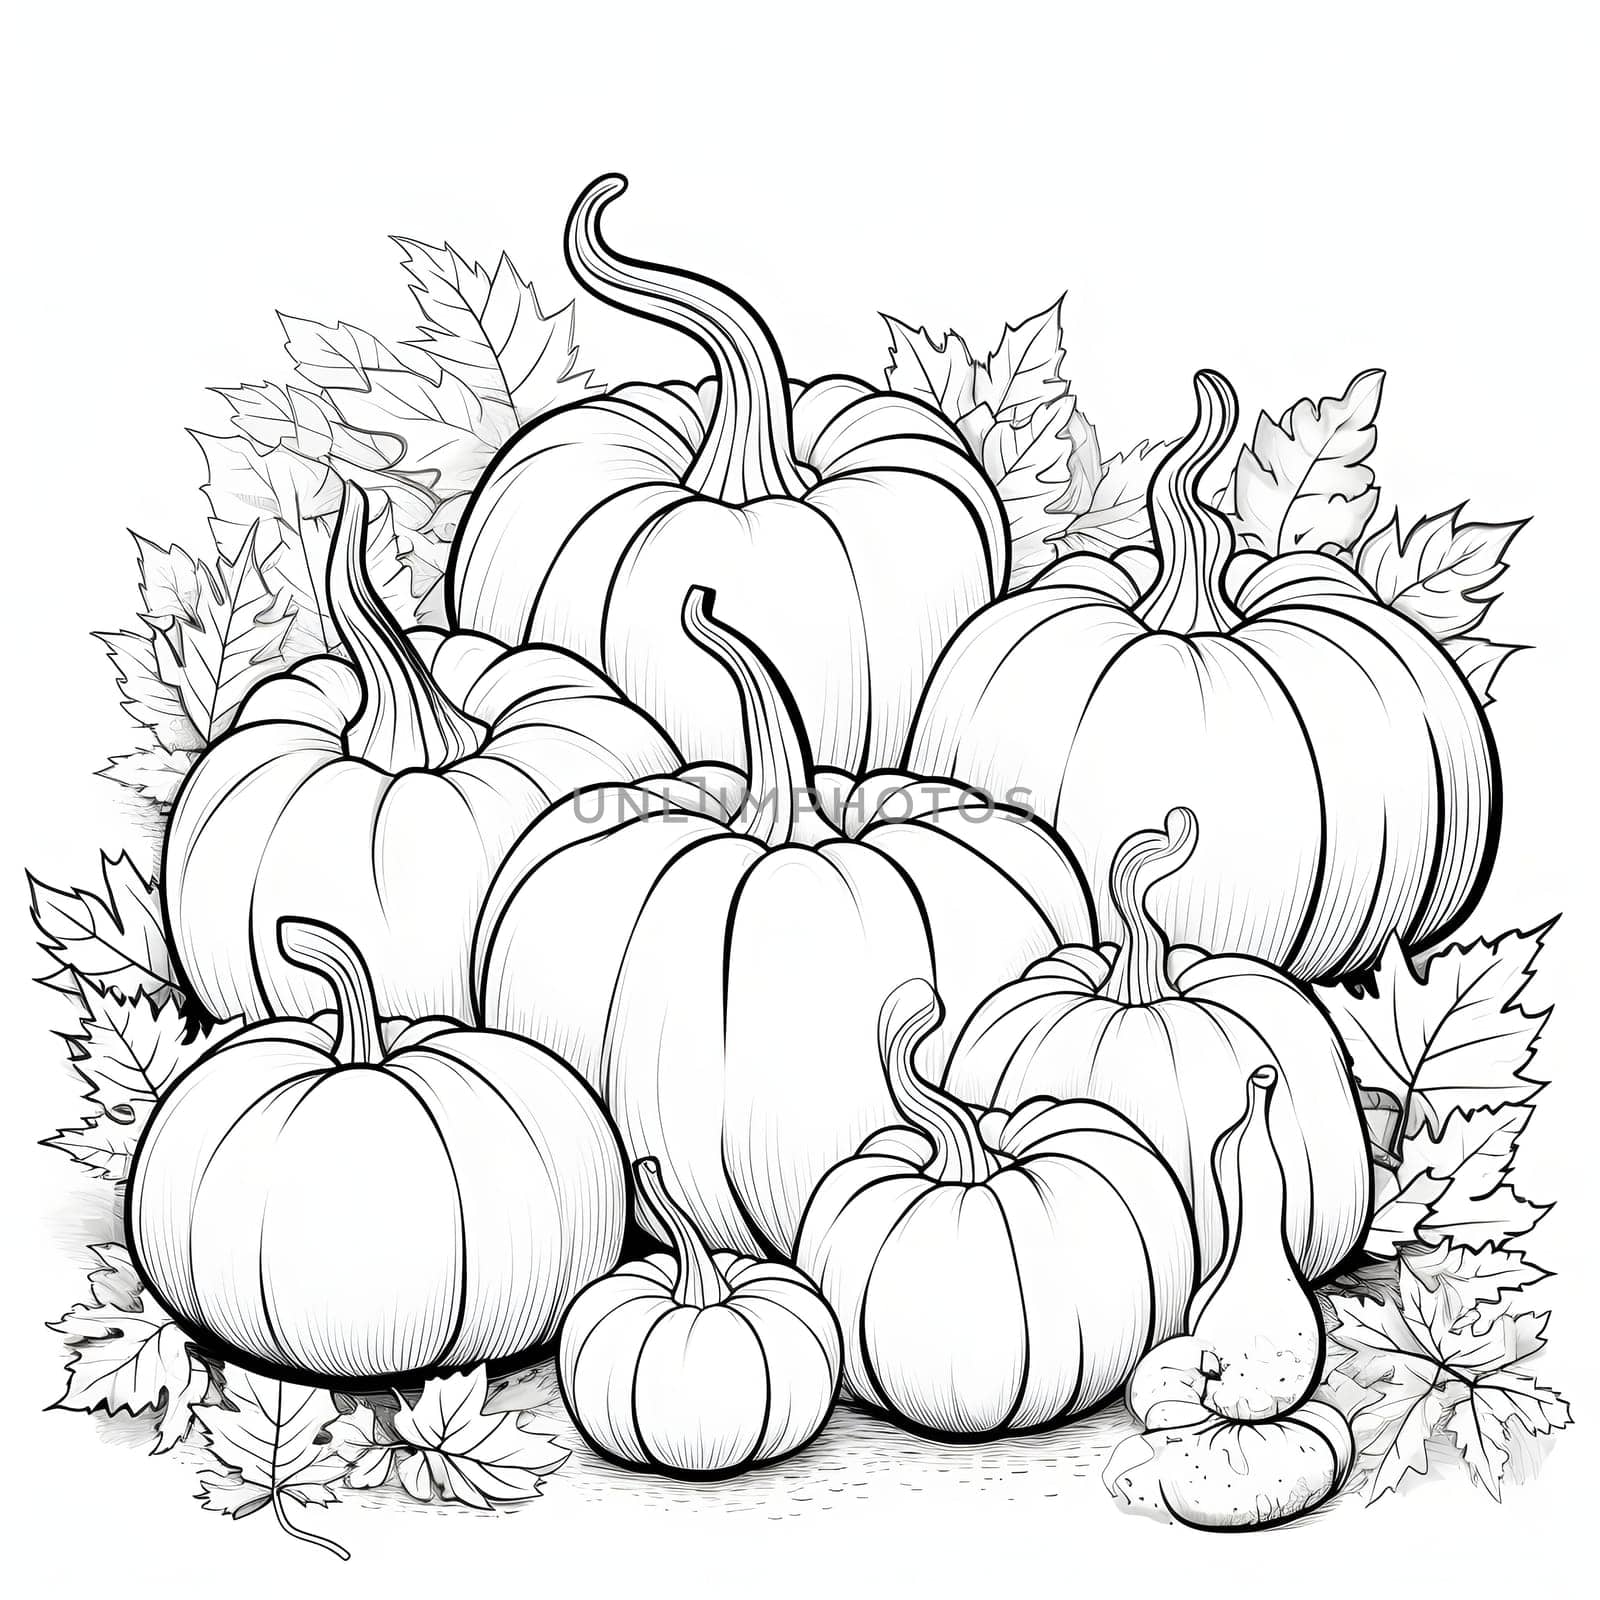 Black and white coloring book, a dozen pumpkins and leaves. Pumpkin as a dish of thanksgiving for the harvest, picture on a white isolated background. by ThemesS